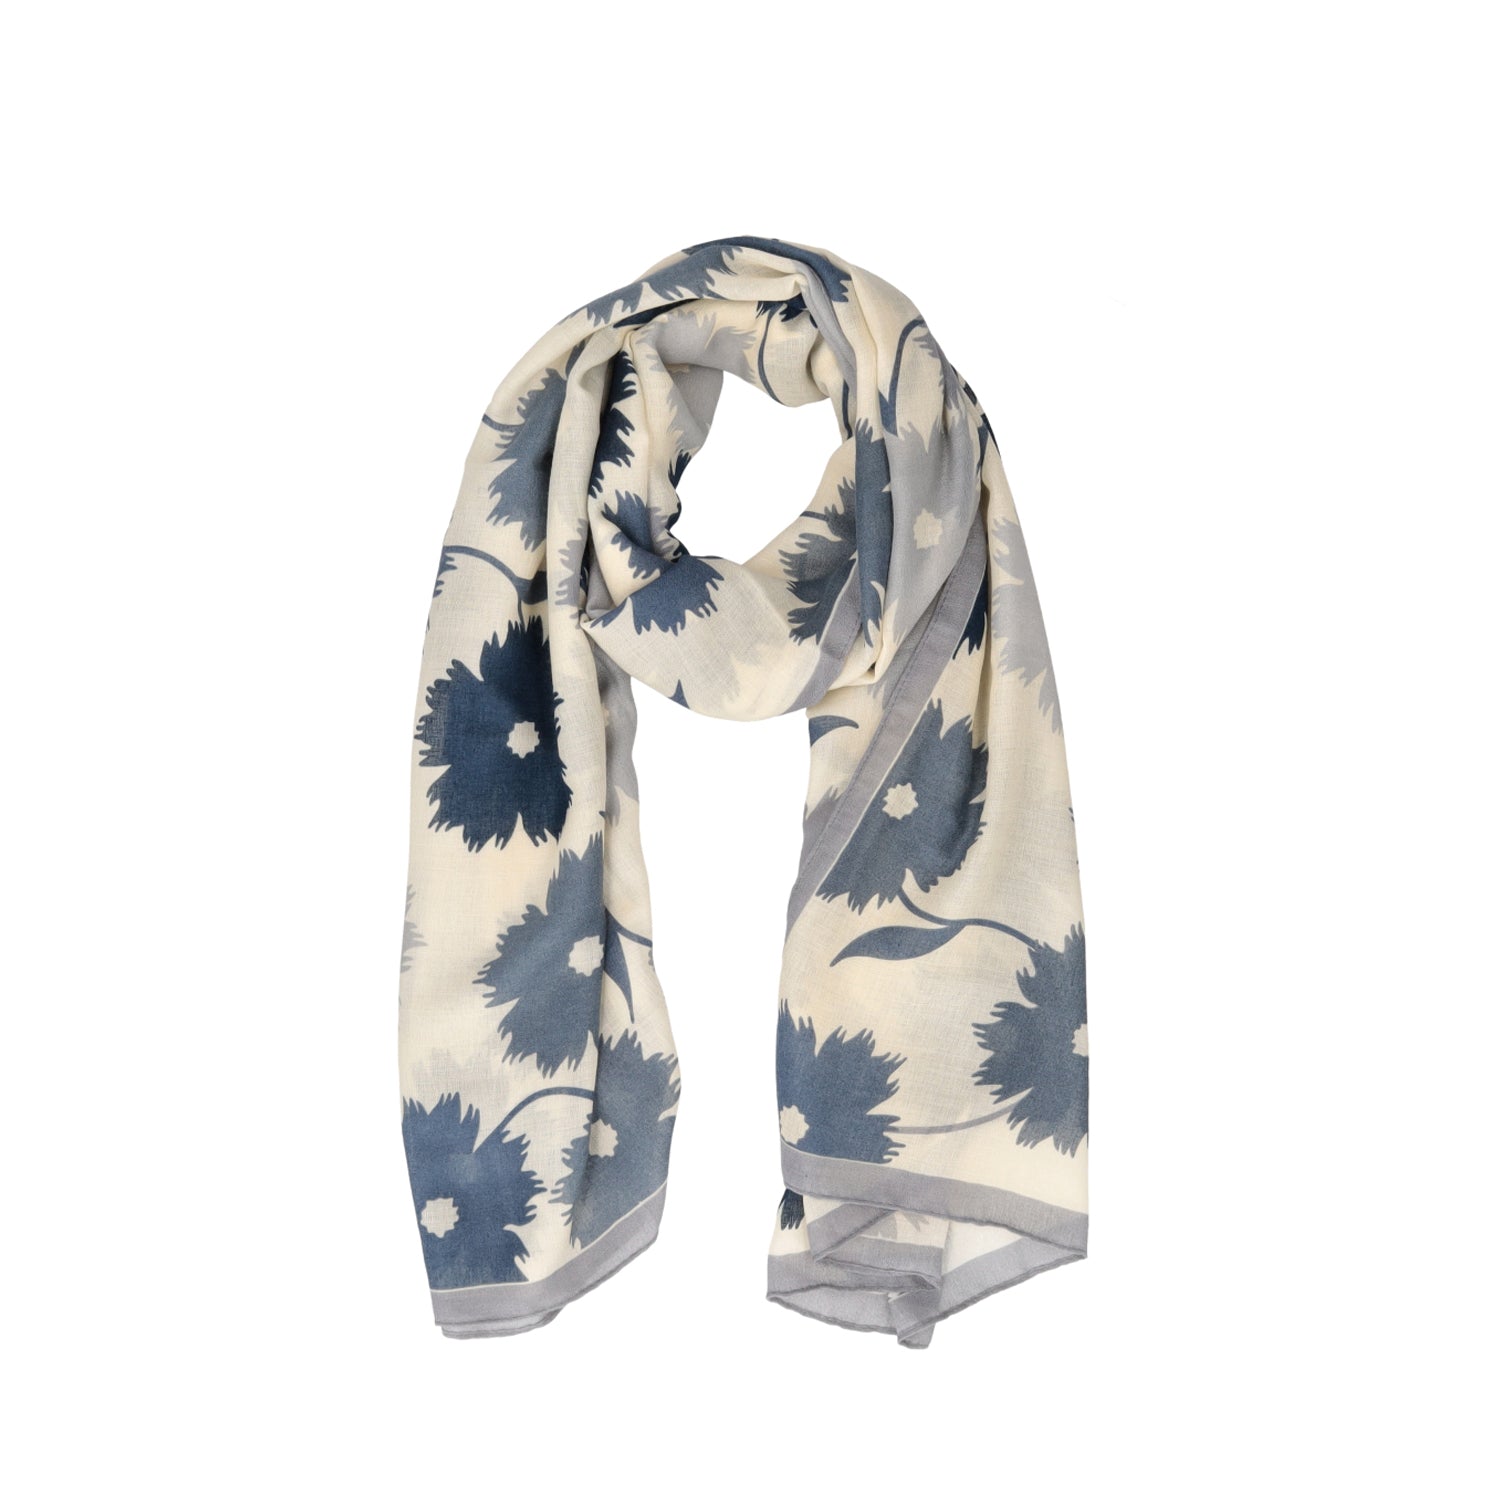 BLUE BERILLO SCARF WITH MAXI PRINTED FLOWERS